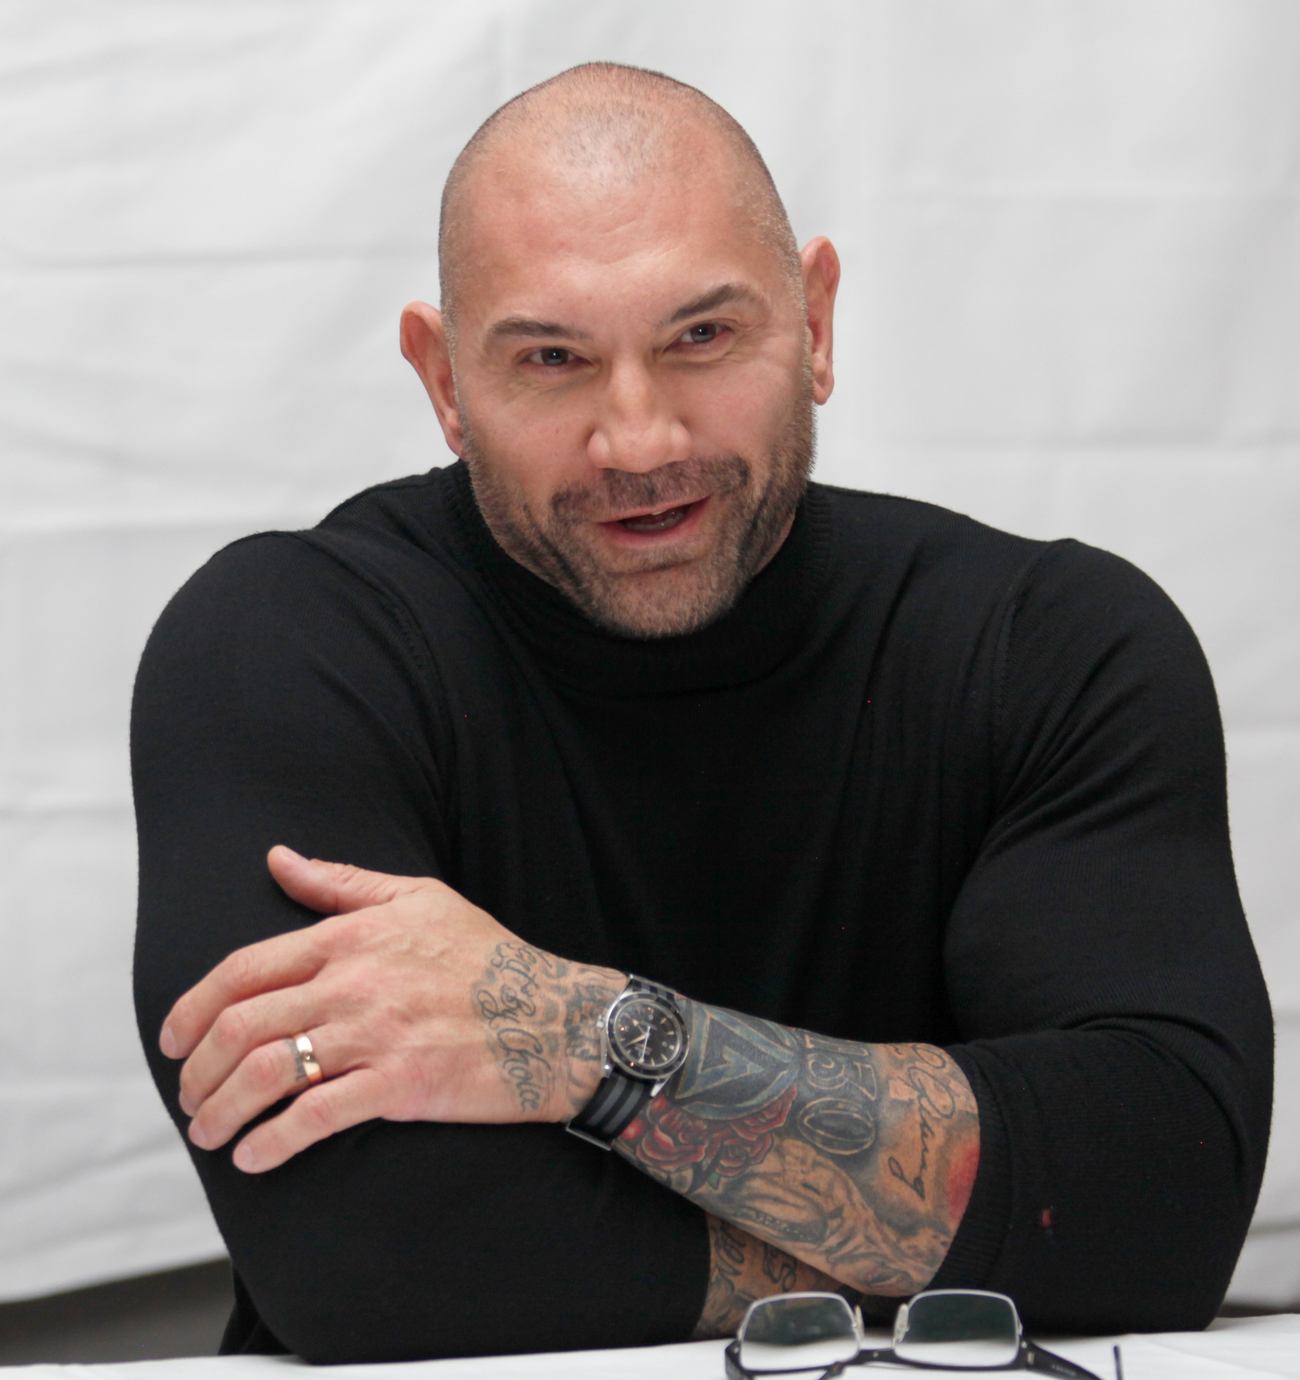 Dave Bautista at Spectre Press Conference